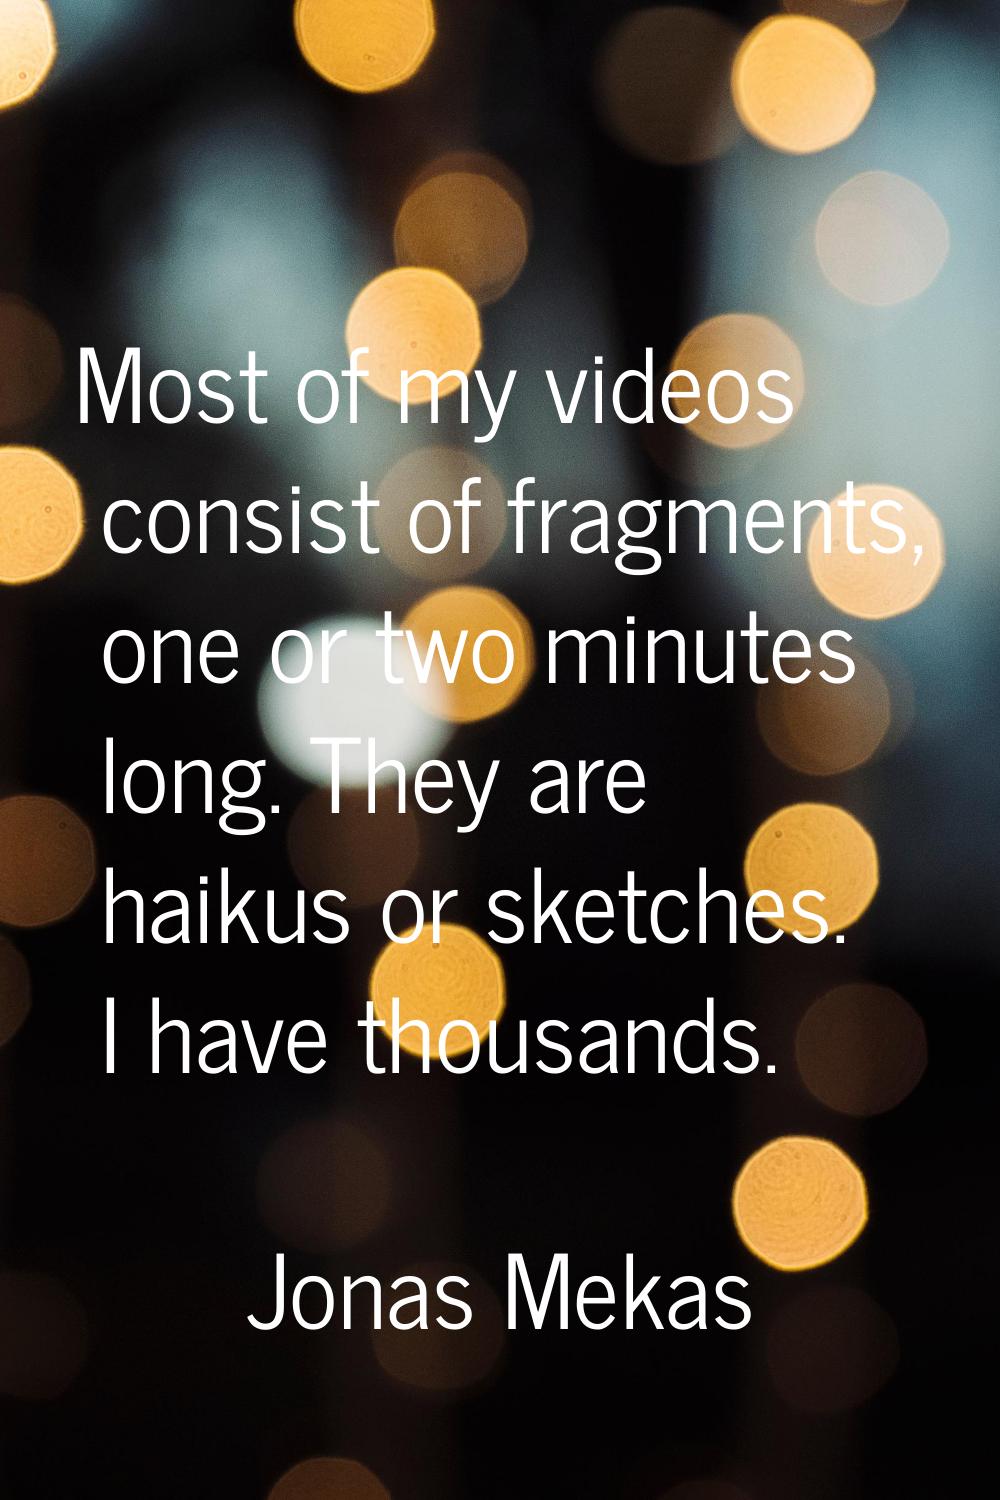 Most of my videos consist of fragments, one or two minutes long. They are haikus or sketches. I hav